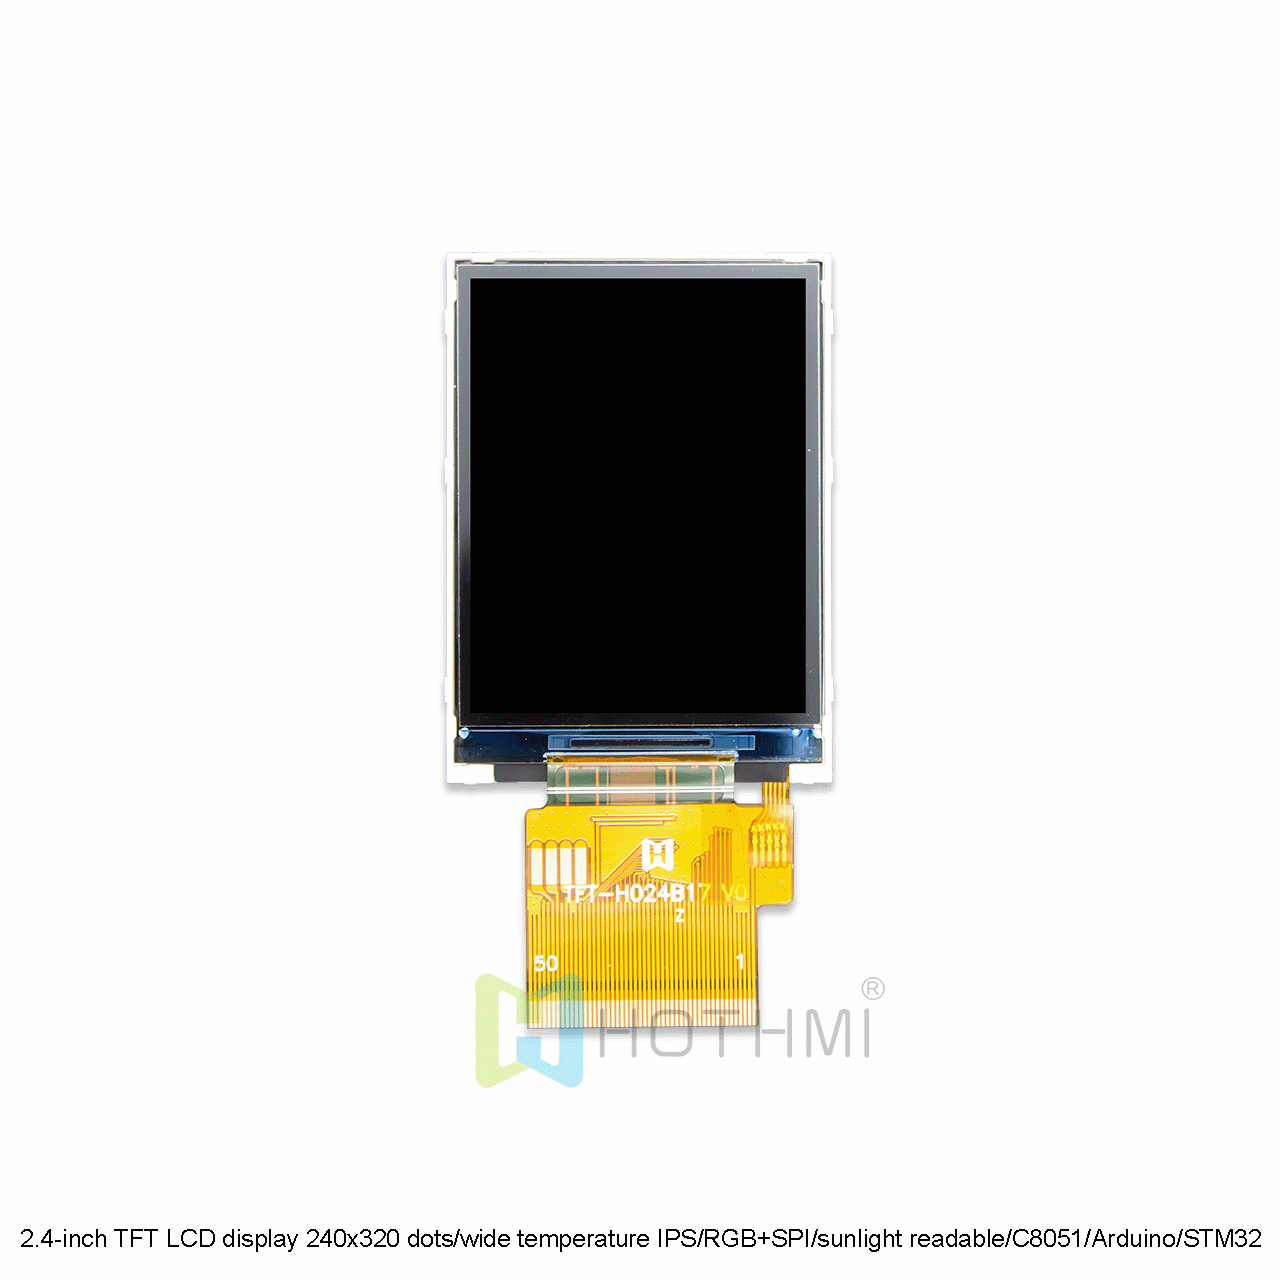 2.4-inch TFT LCD display 240x320 dots/wide temperature IPS full angle/RGB+SPI/sunlight readable/compatible with C8051/Arduino/STM32